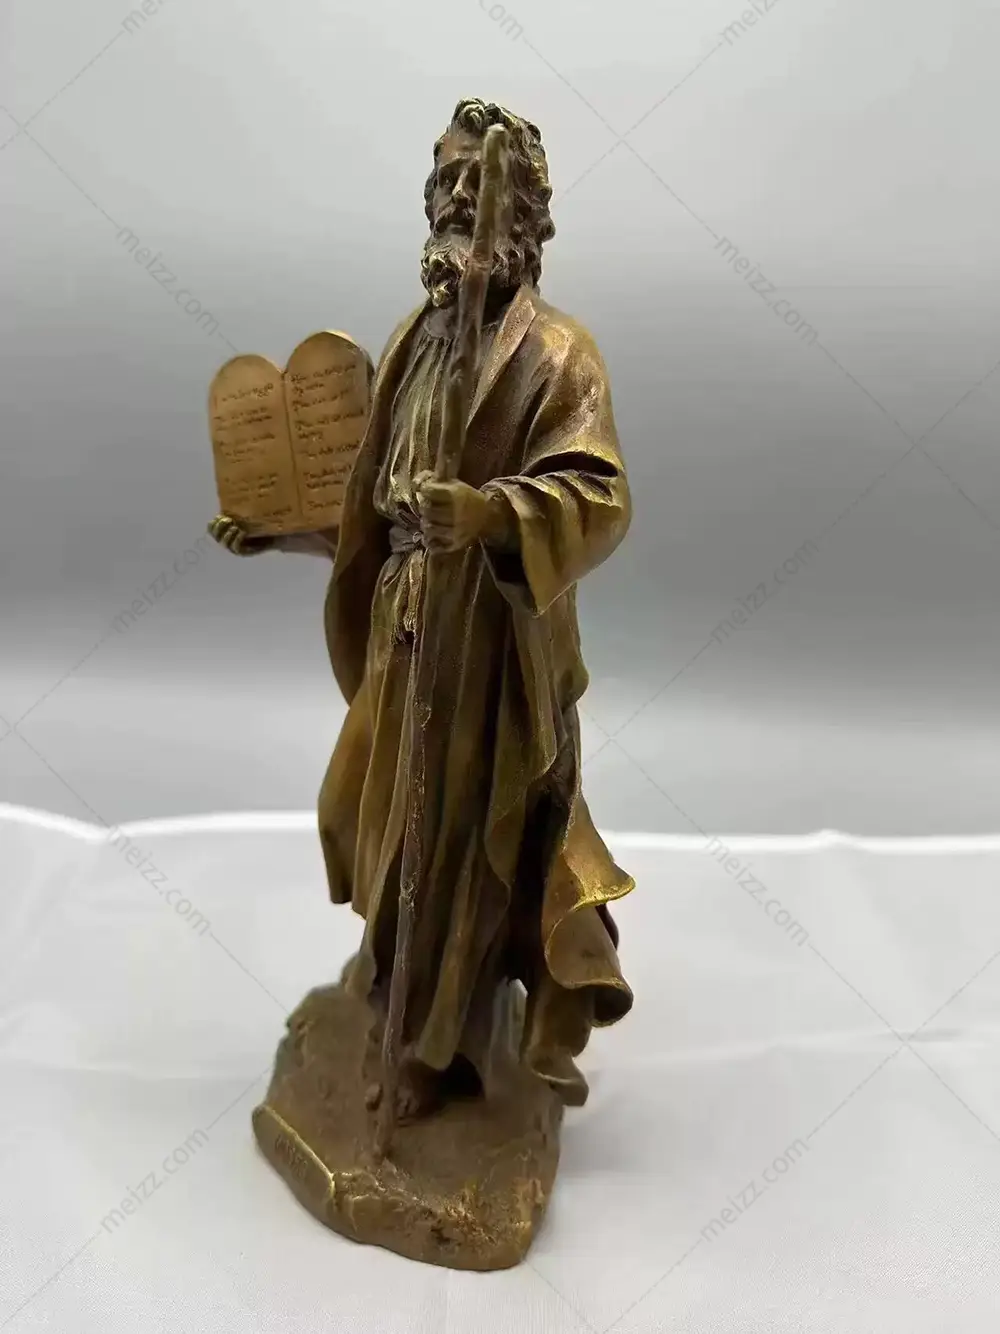 moses statue for sale